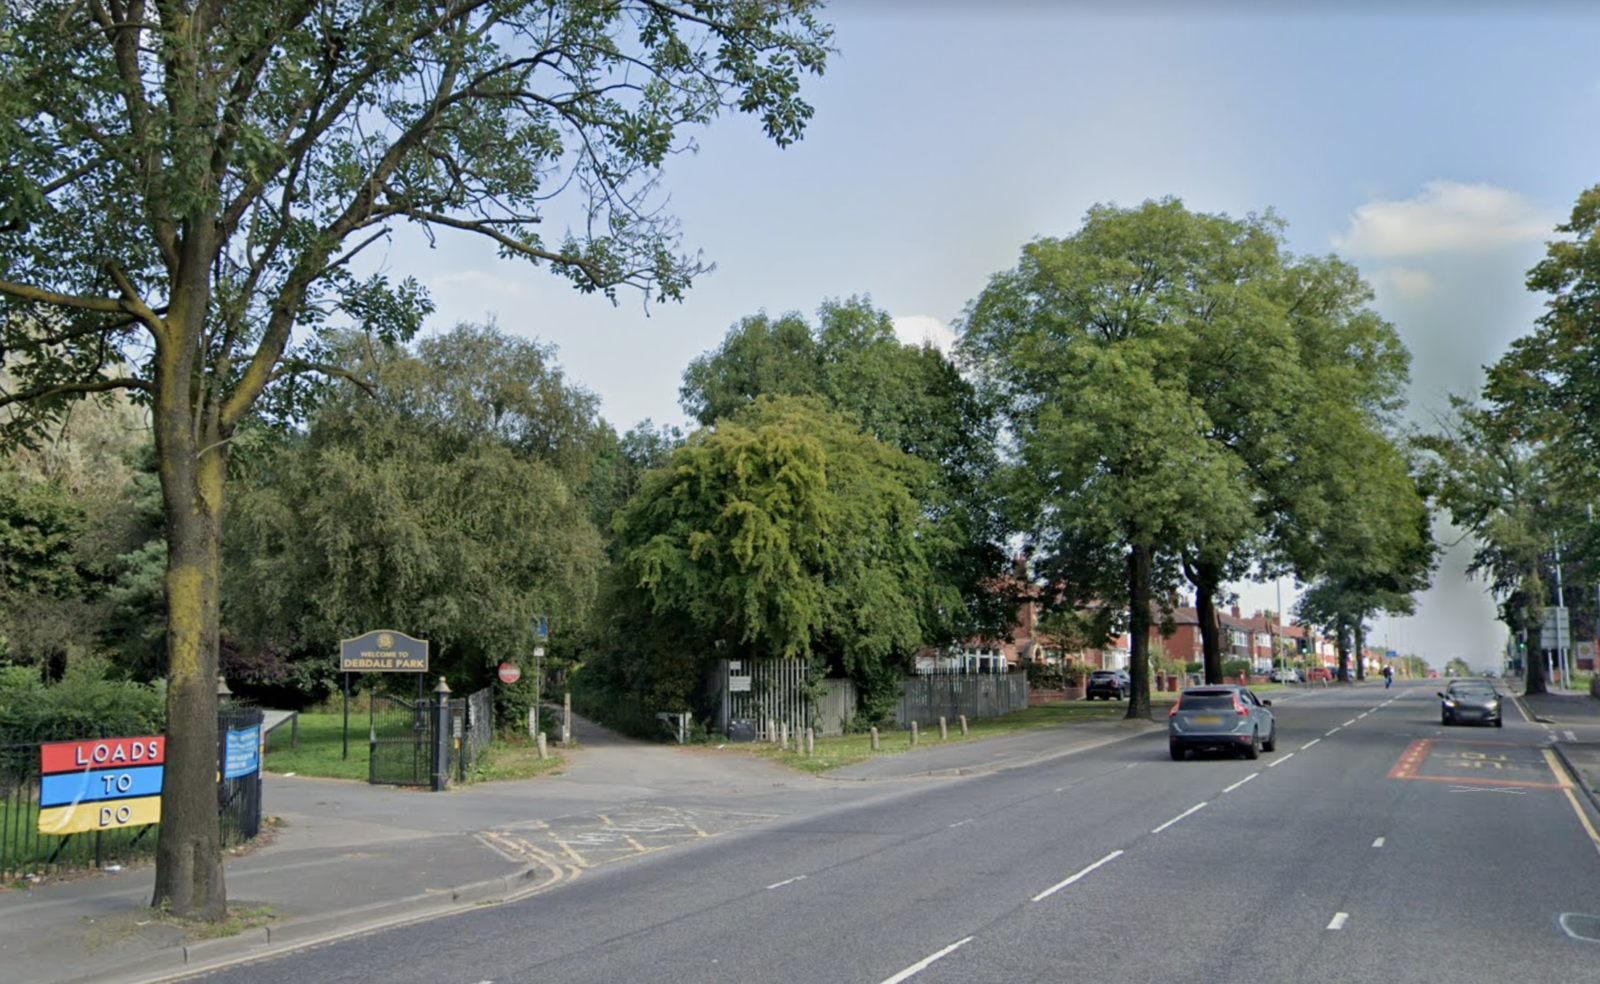 11-year-old boy seriously injured in hit and run incident in Gorton, The Manc